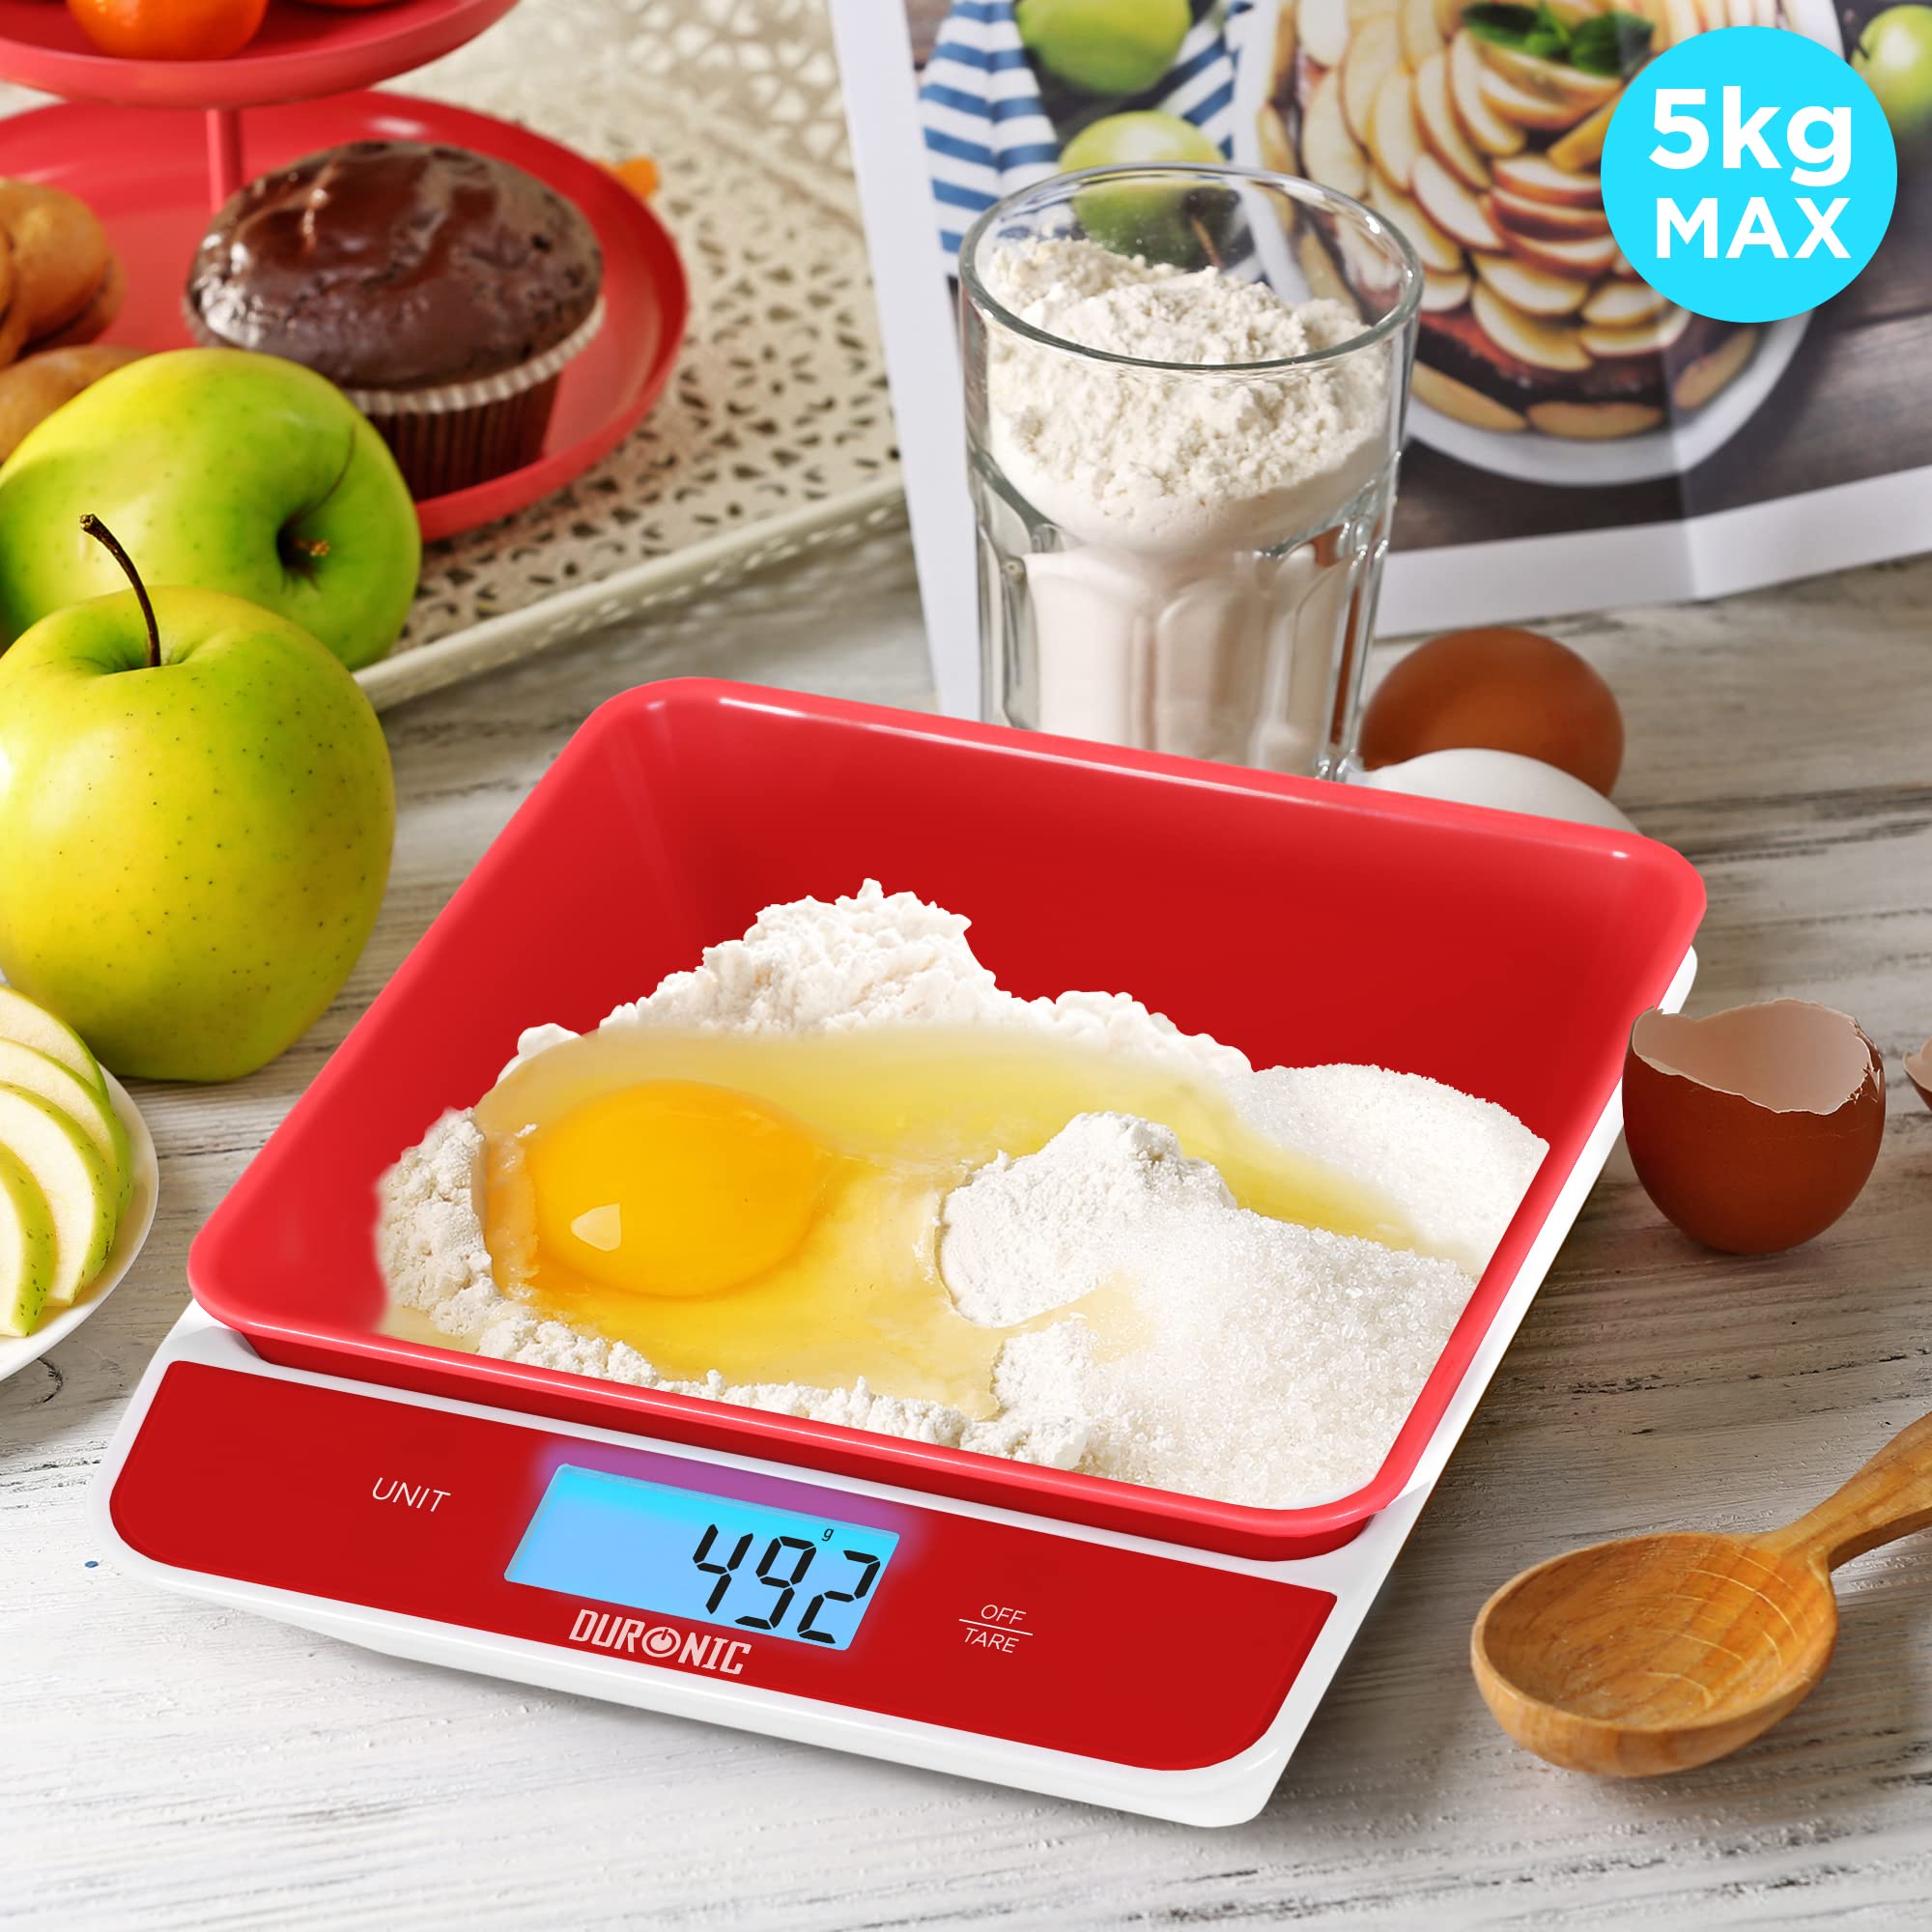 Duronic Kitchen Scales with Bowl KS100 RD for Baking Postal Parcel Weigh | Red Design with 1.2L Bowl | 5kg Capacity | Tare | 1g Precision